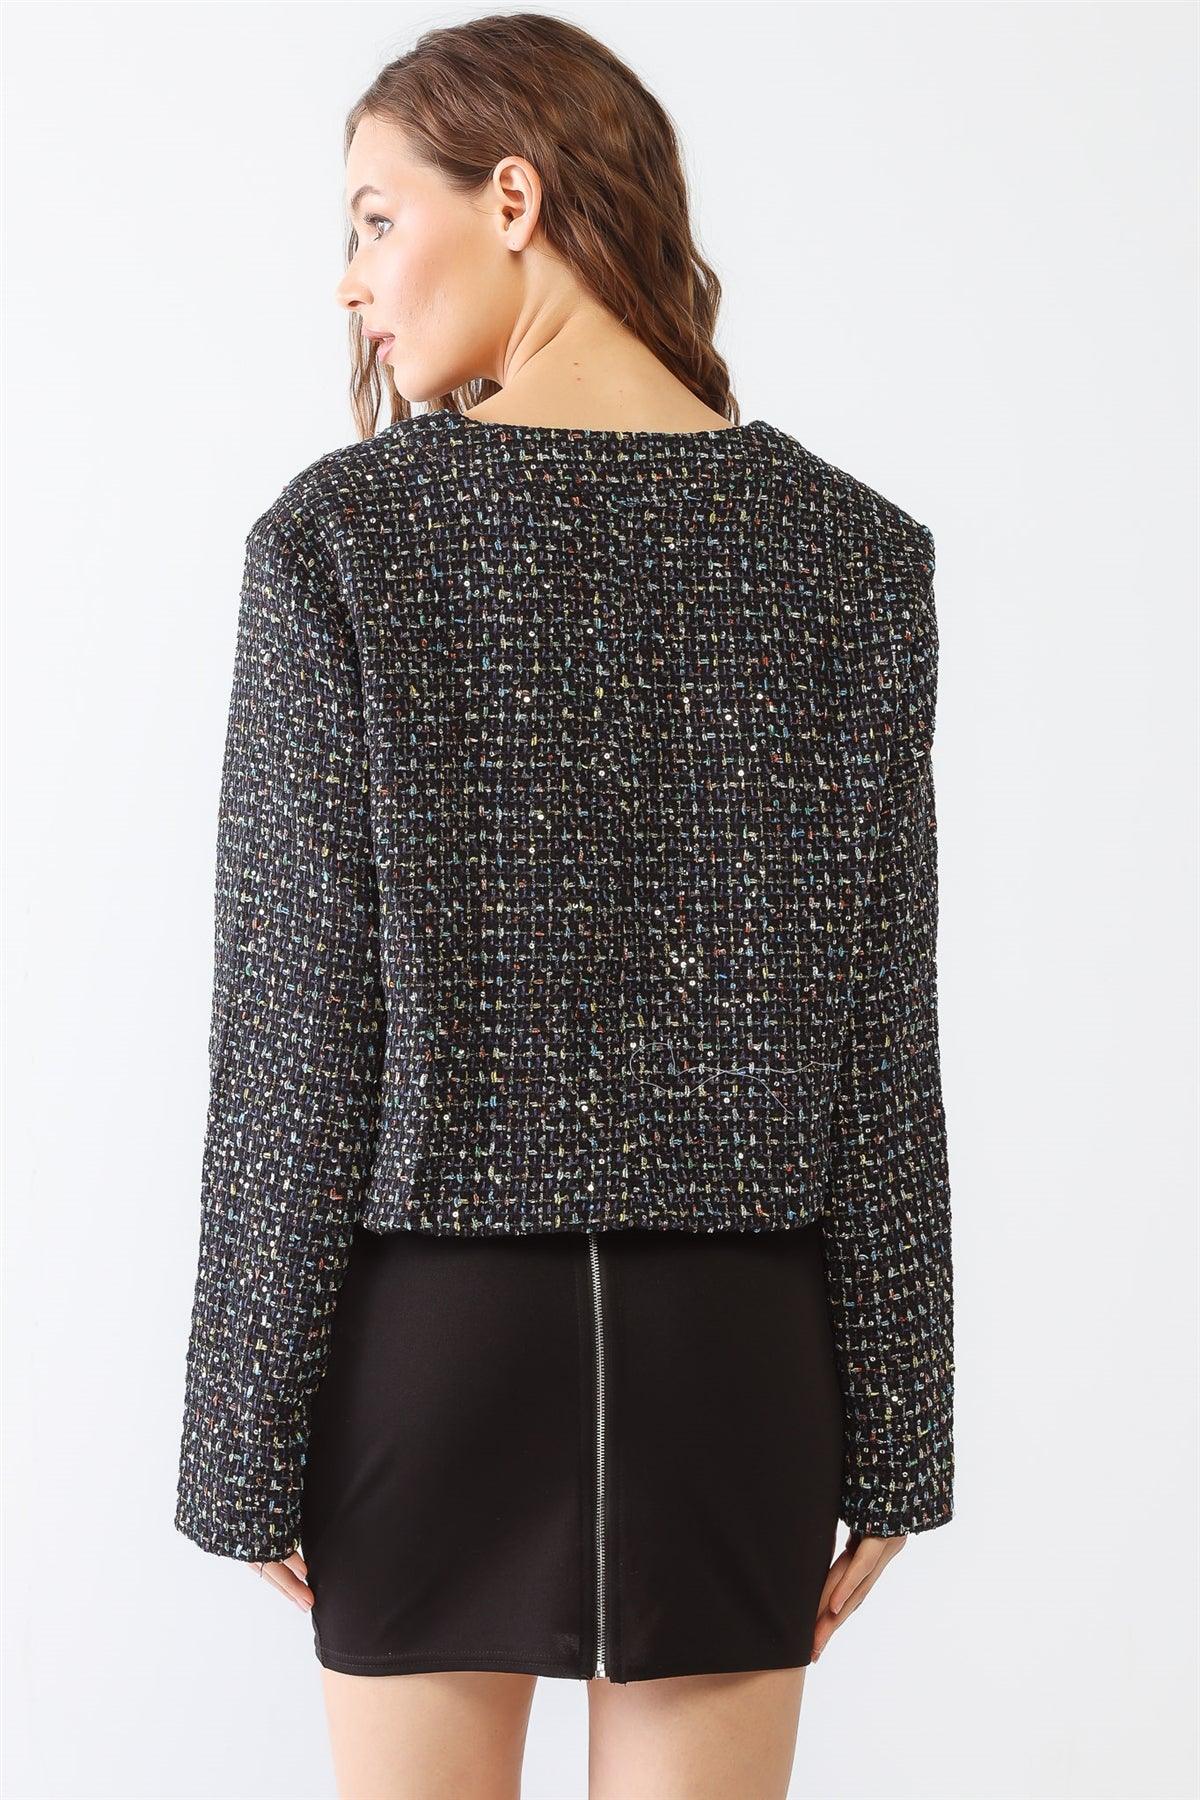 Black Tweed Sequin Multicolor Embroidery Button-Up Two Pocket Long Sleeve Jacket /1-2-2-1